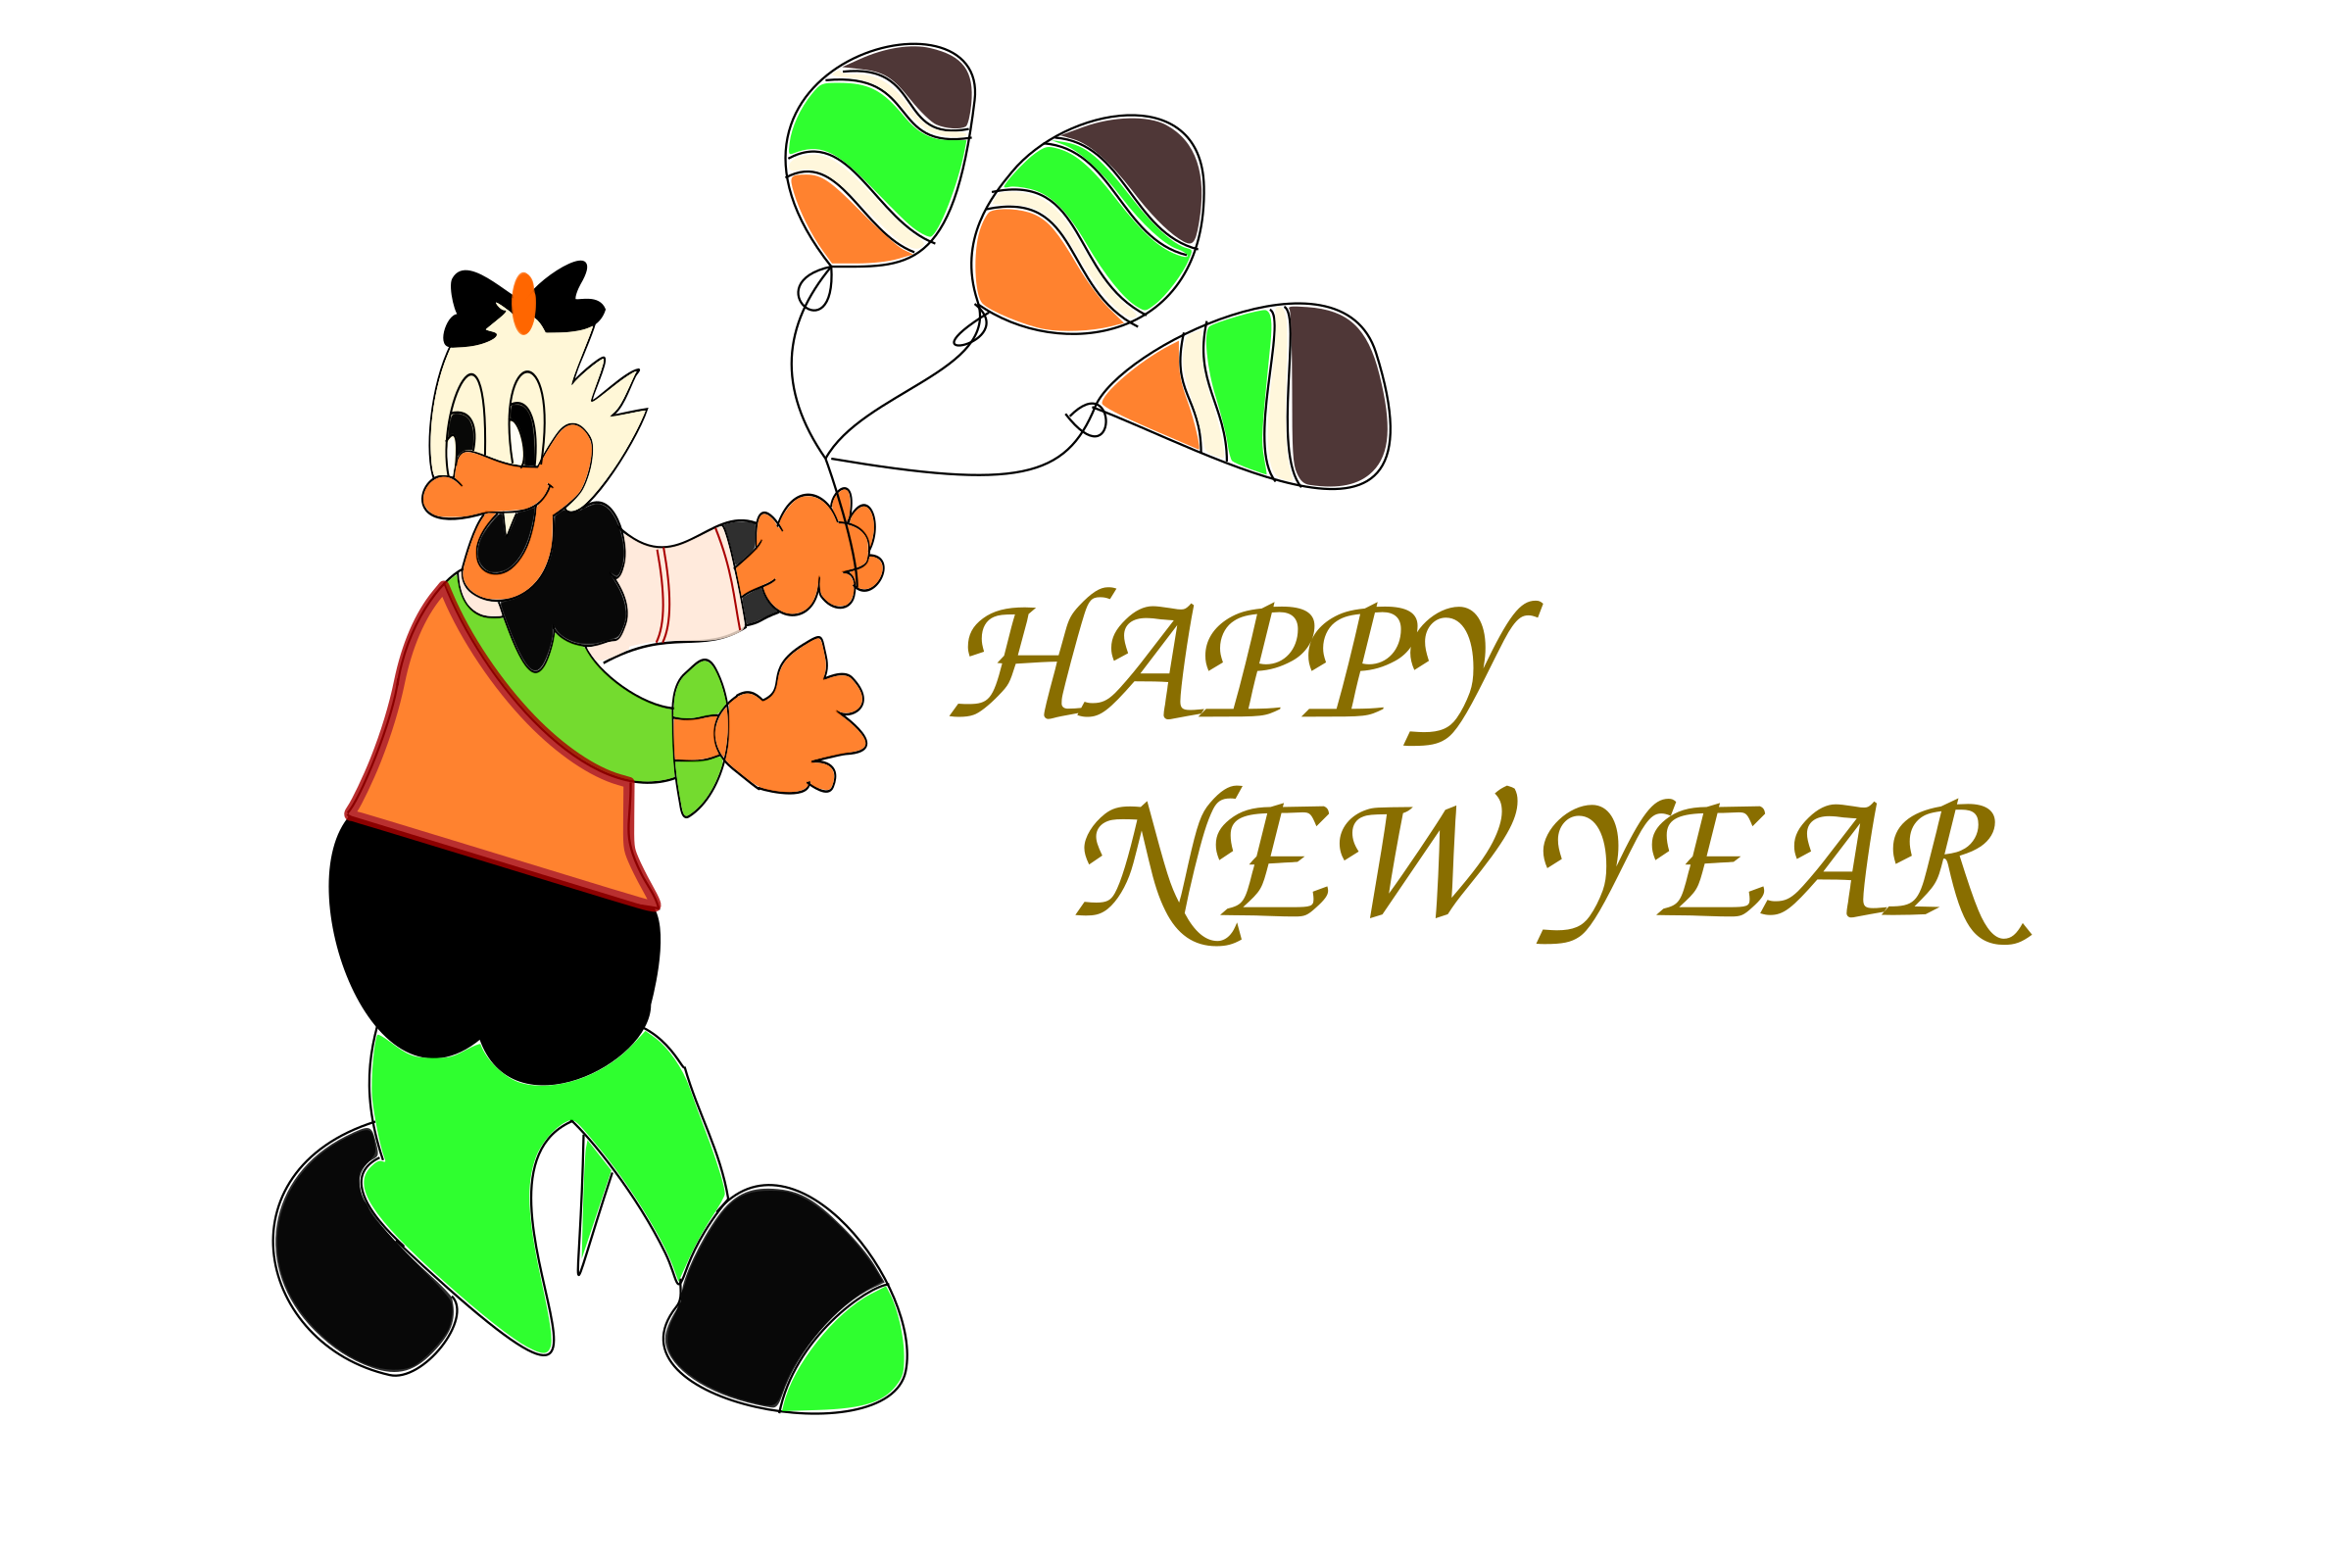 microsoft office clipart new year - photo #16